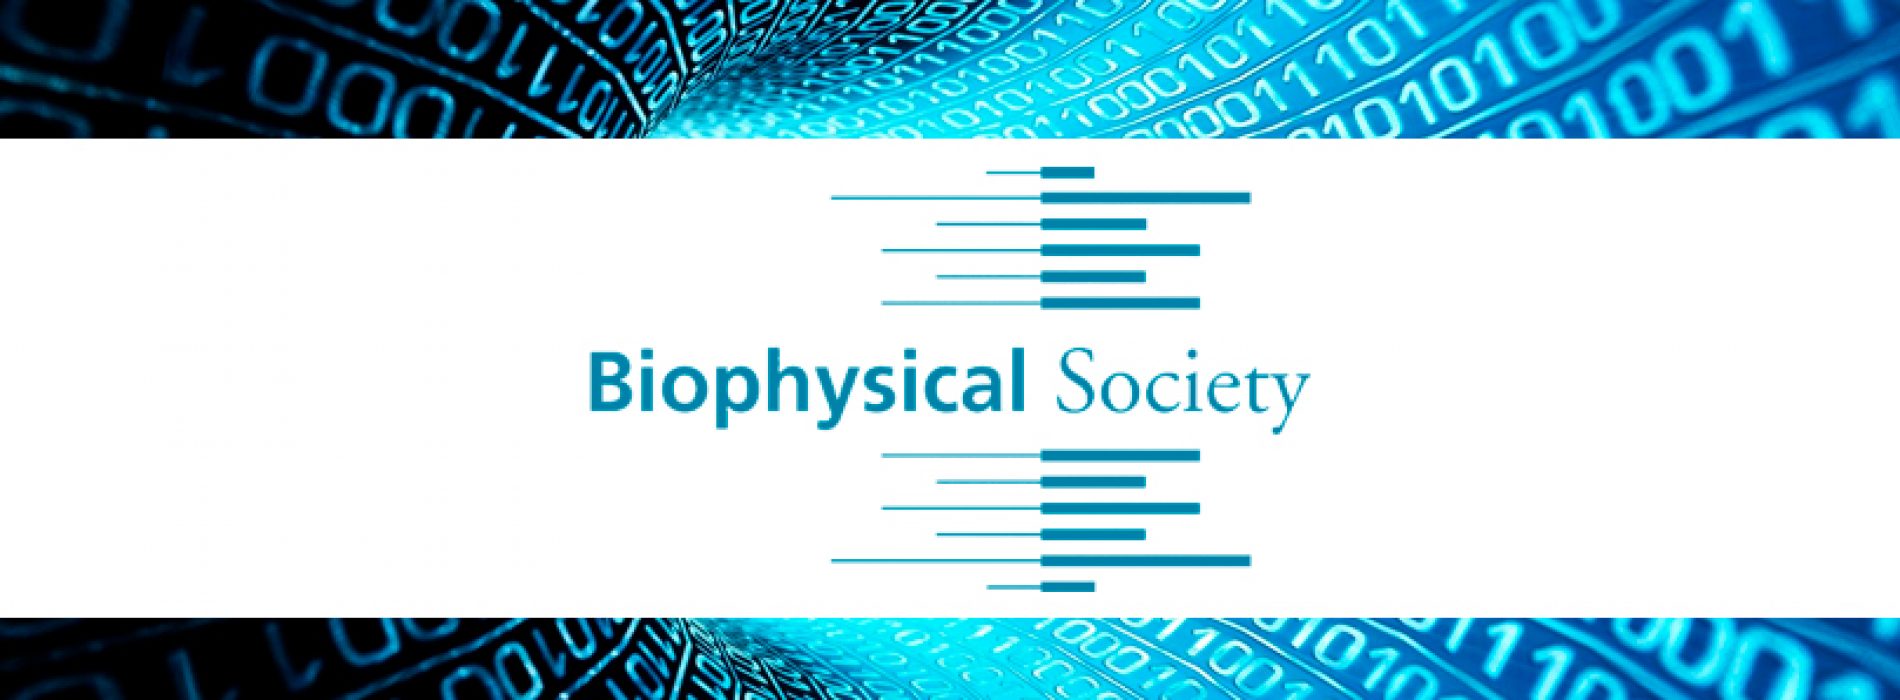 Read the optical tweezers article collection from the Biophysical Journal